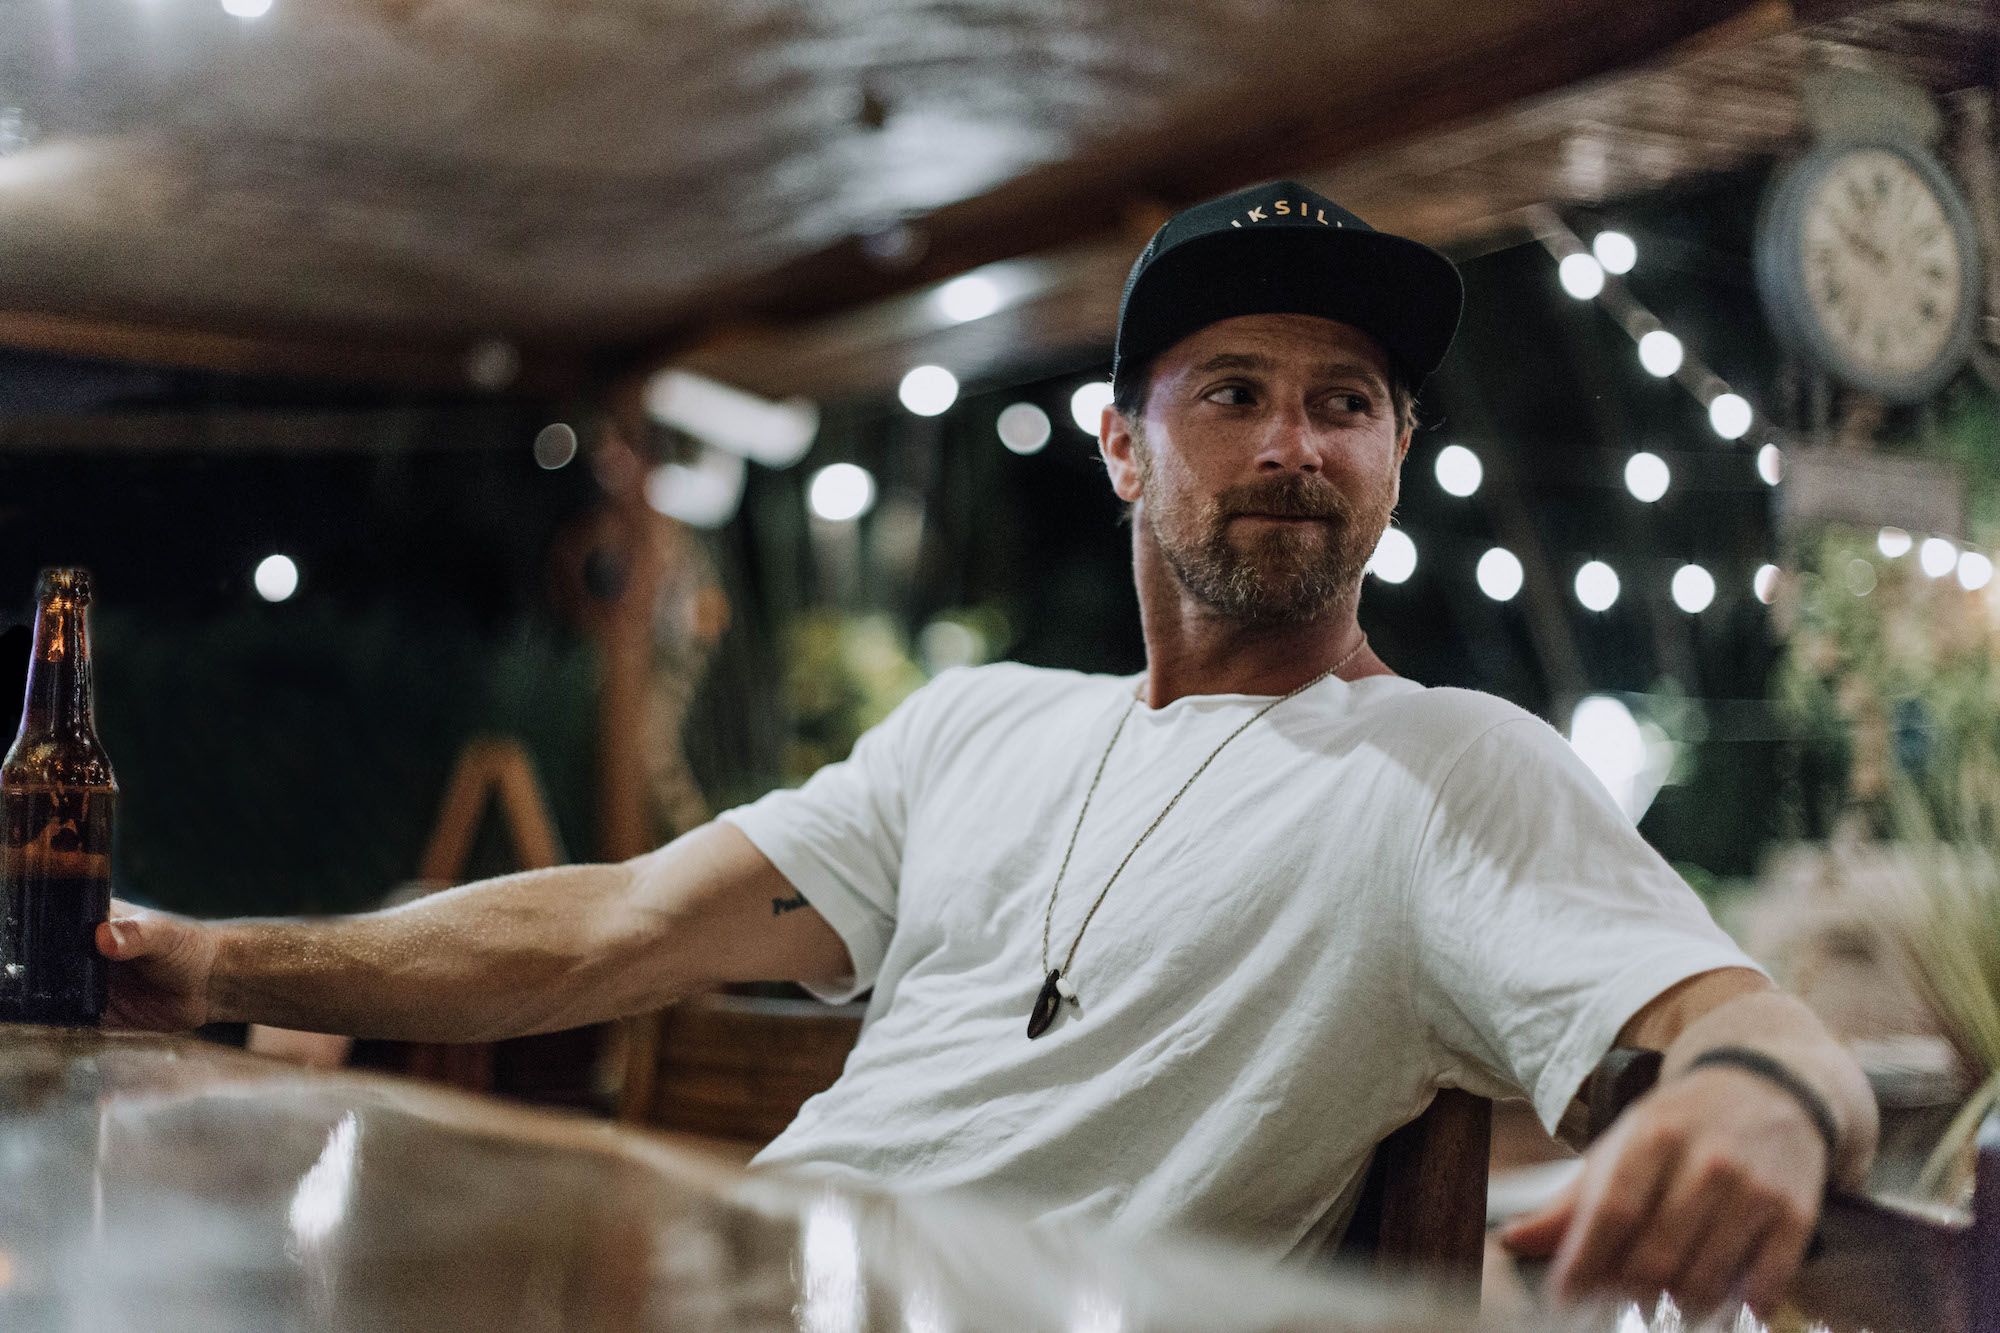 KIP MOORE PREMIERES EVOCATIVE NEW MUSIC VIDEO FOR “LAST SHOT” EXCLUSIVELY WITH ENTERTAINMENT TONIGHT